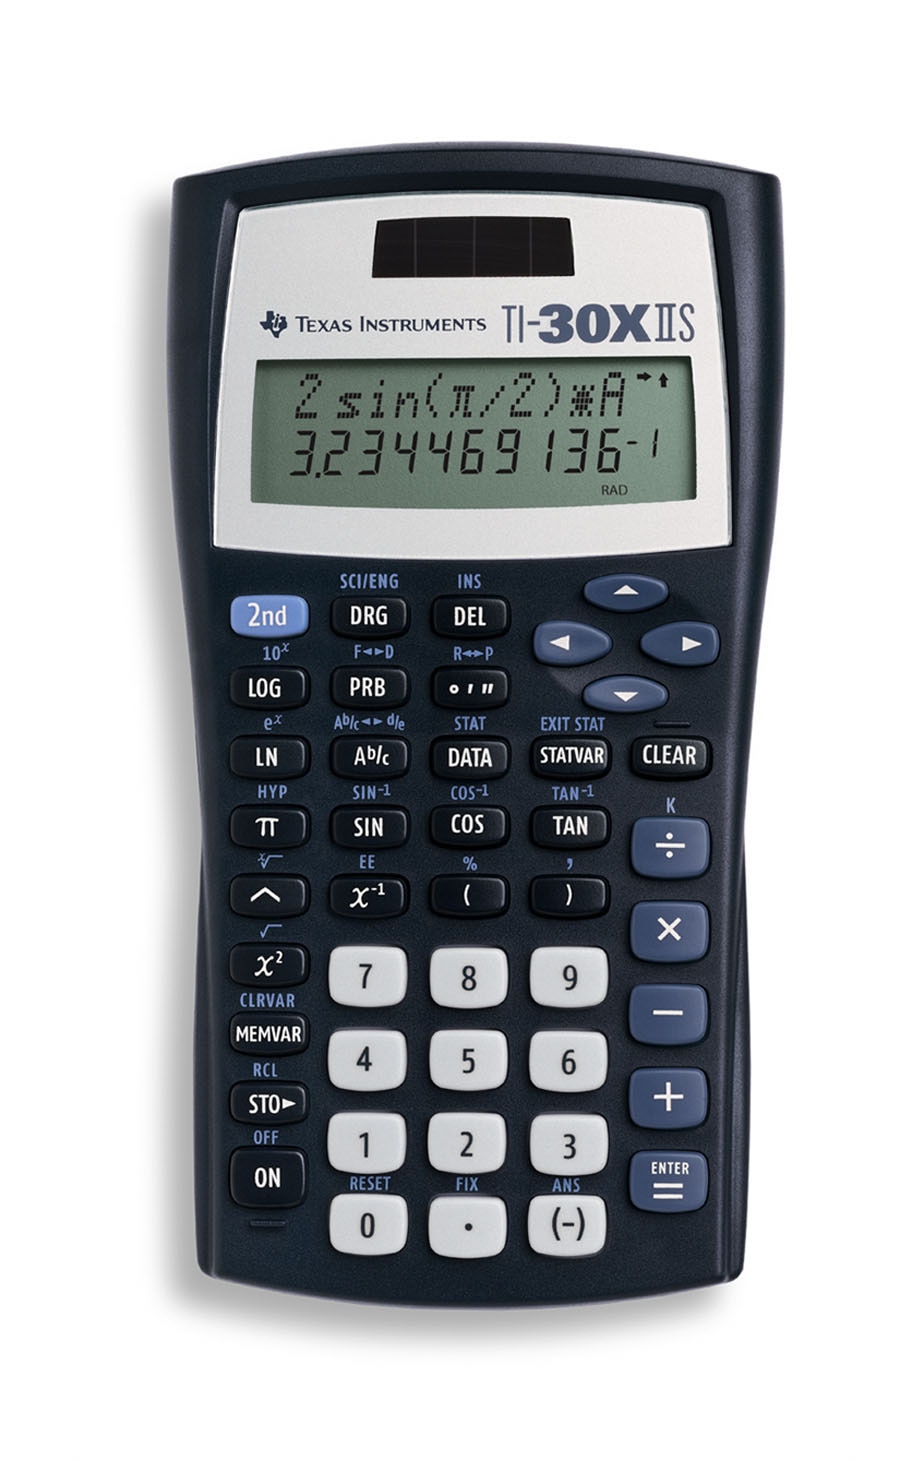 Scientific calculator with equation recall combines statistics and advanced scientific functions. Two-line display shows entries on the top line and results on the bottom line. Entry line on the top of the display shows up to 11 characters and can sc